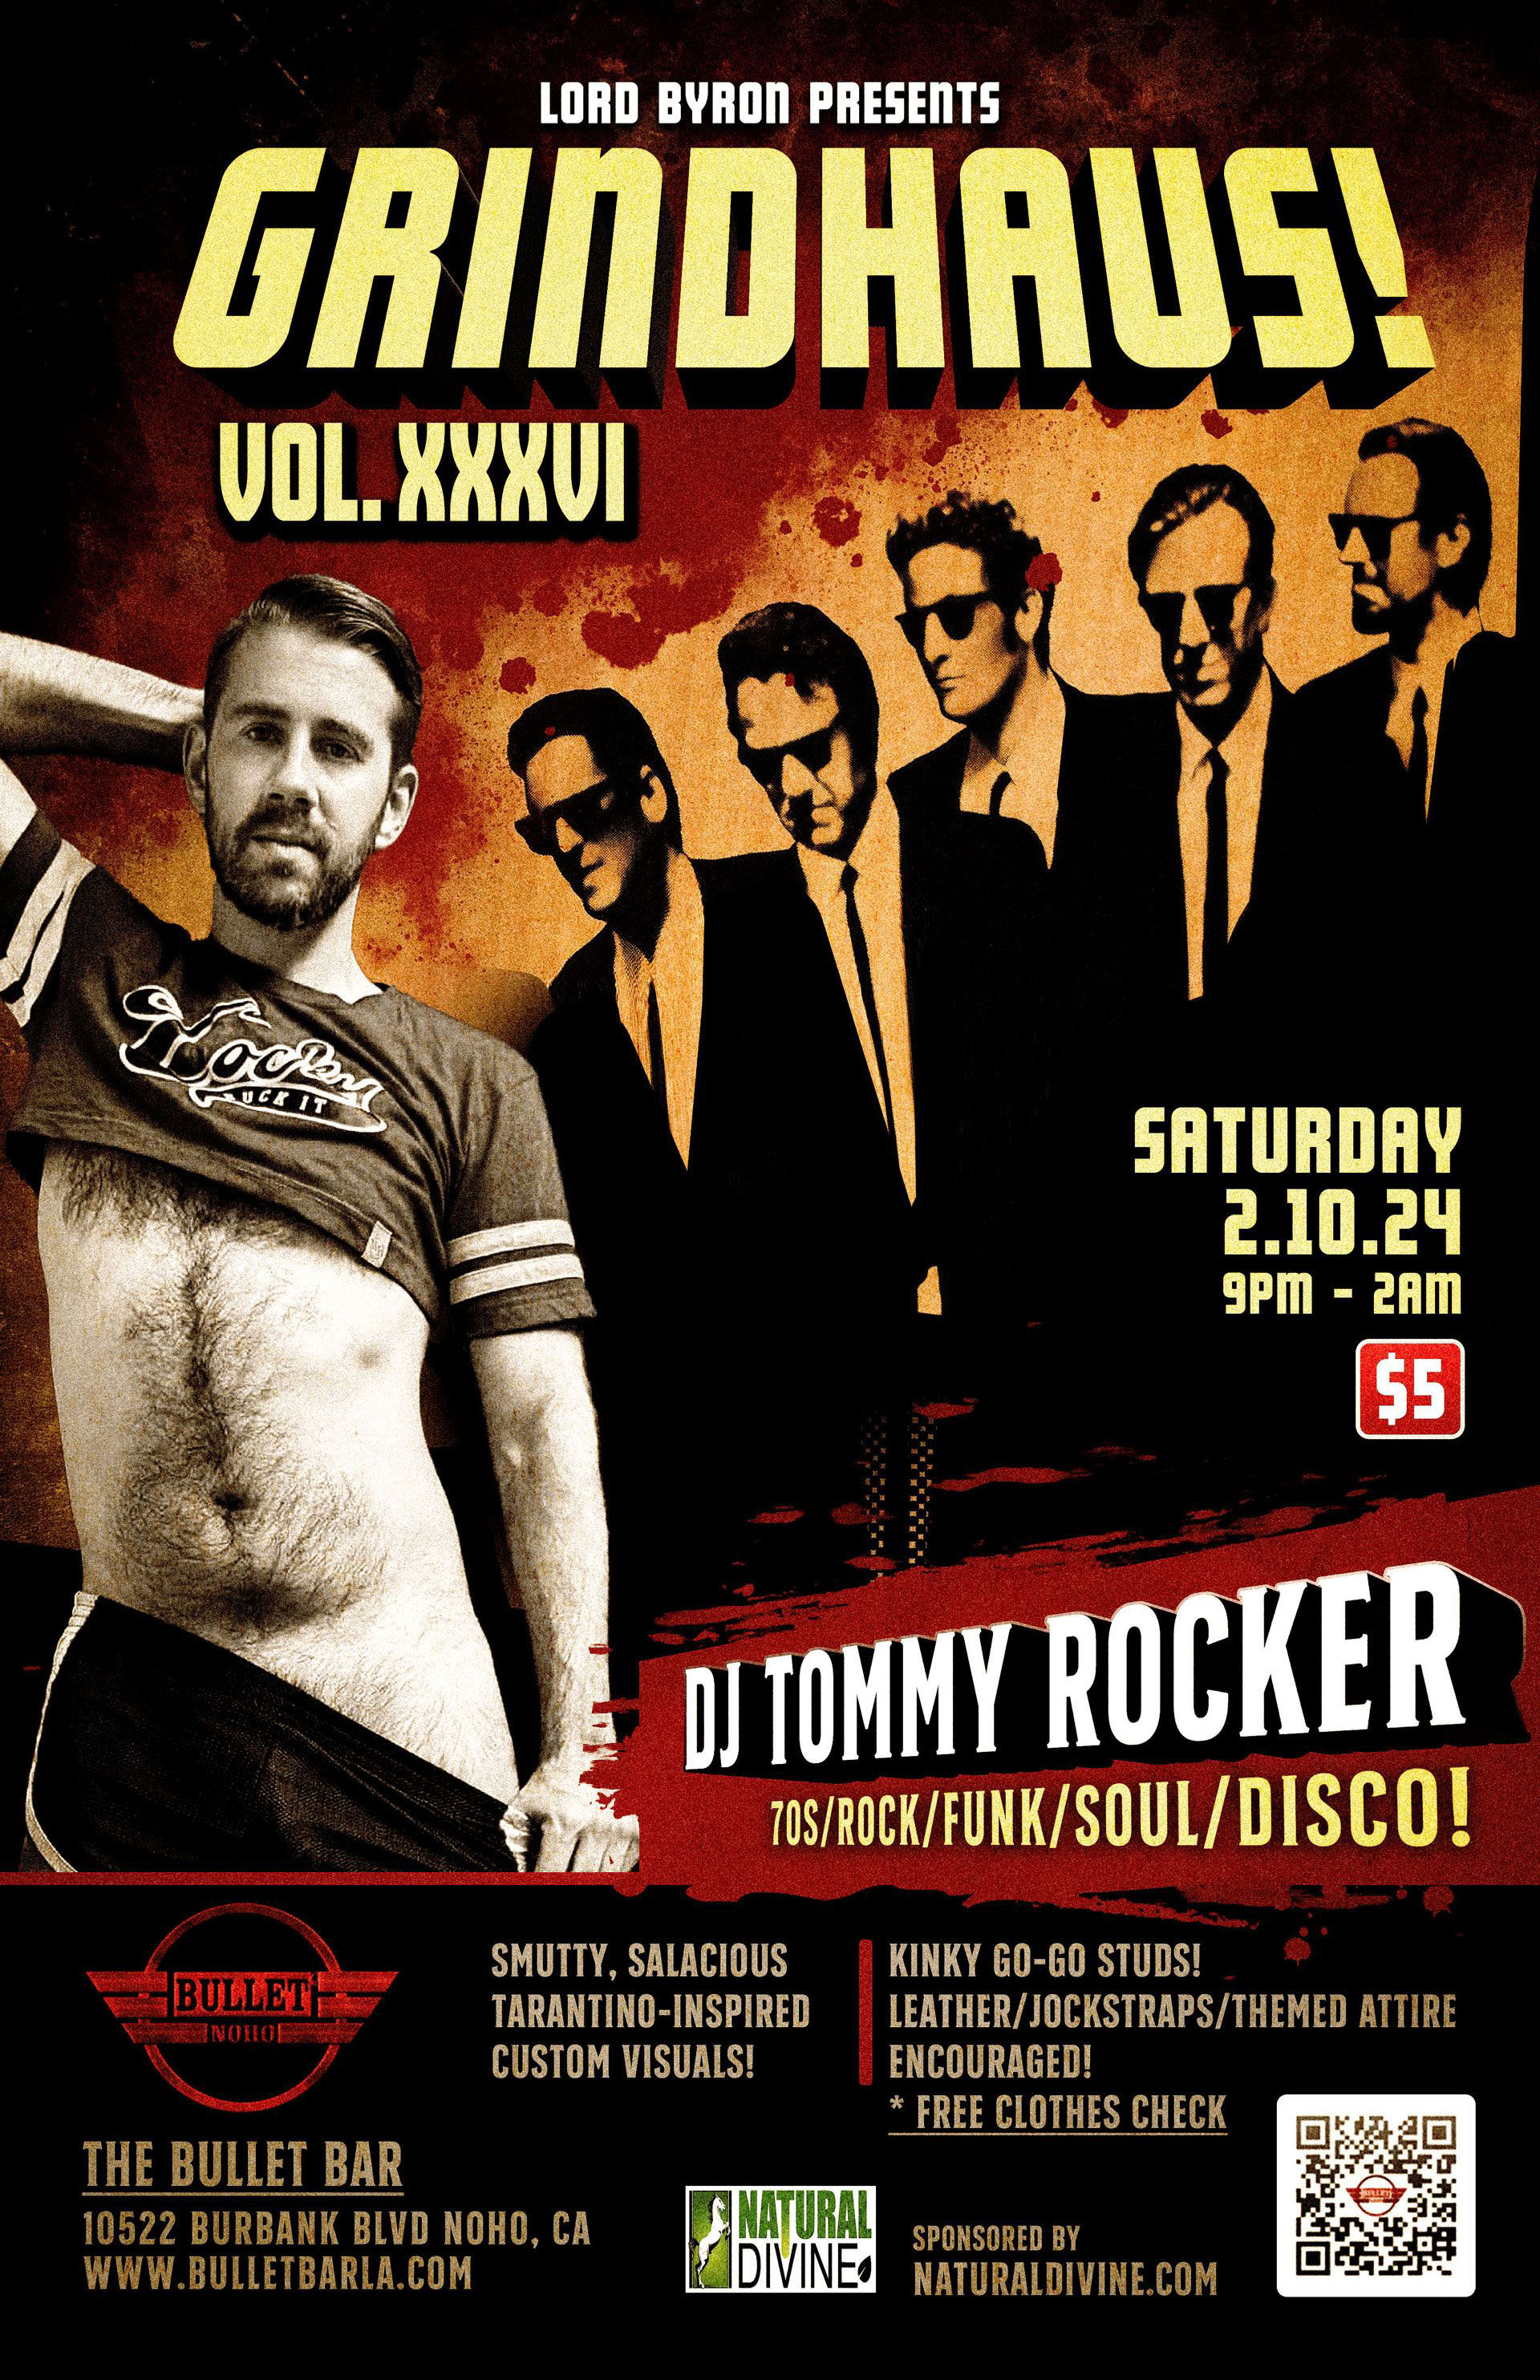 LORD BYRON Presents GRINDHAUS! VOL. XXXVI with DJ TOMMY ROCKER at THE BULLET BAR: Saturday, 02/10/24 at 9:00 PM! $5 cover.